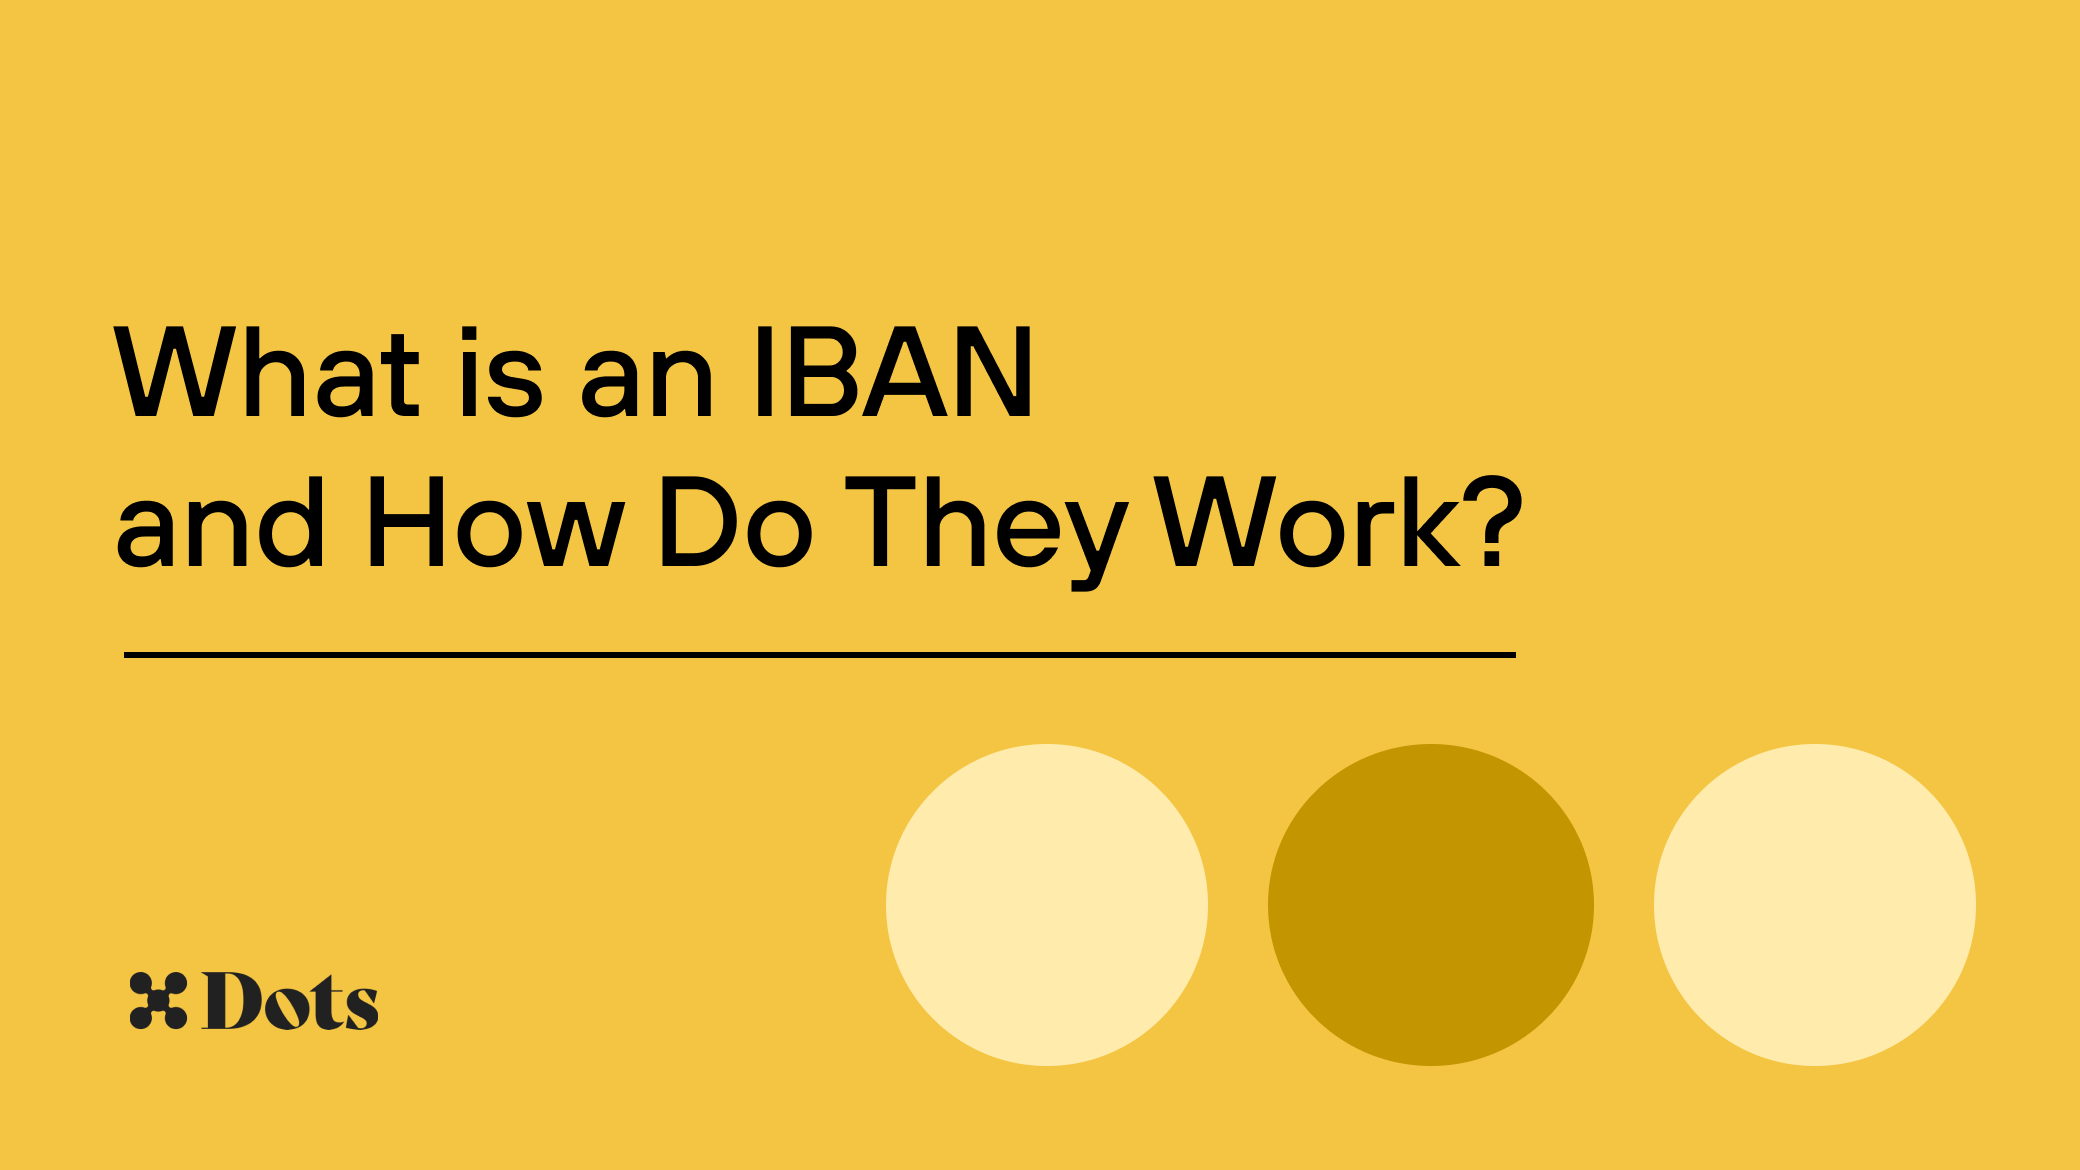 What is an IBAN and How Do They Work? - Dots